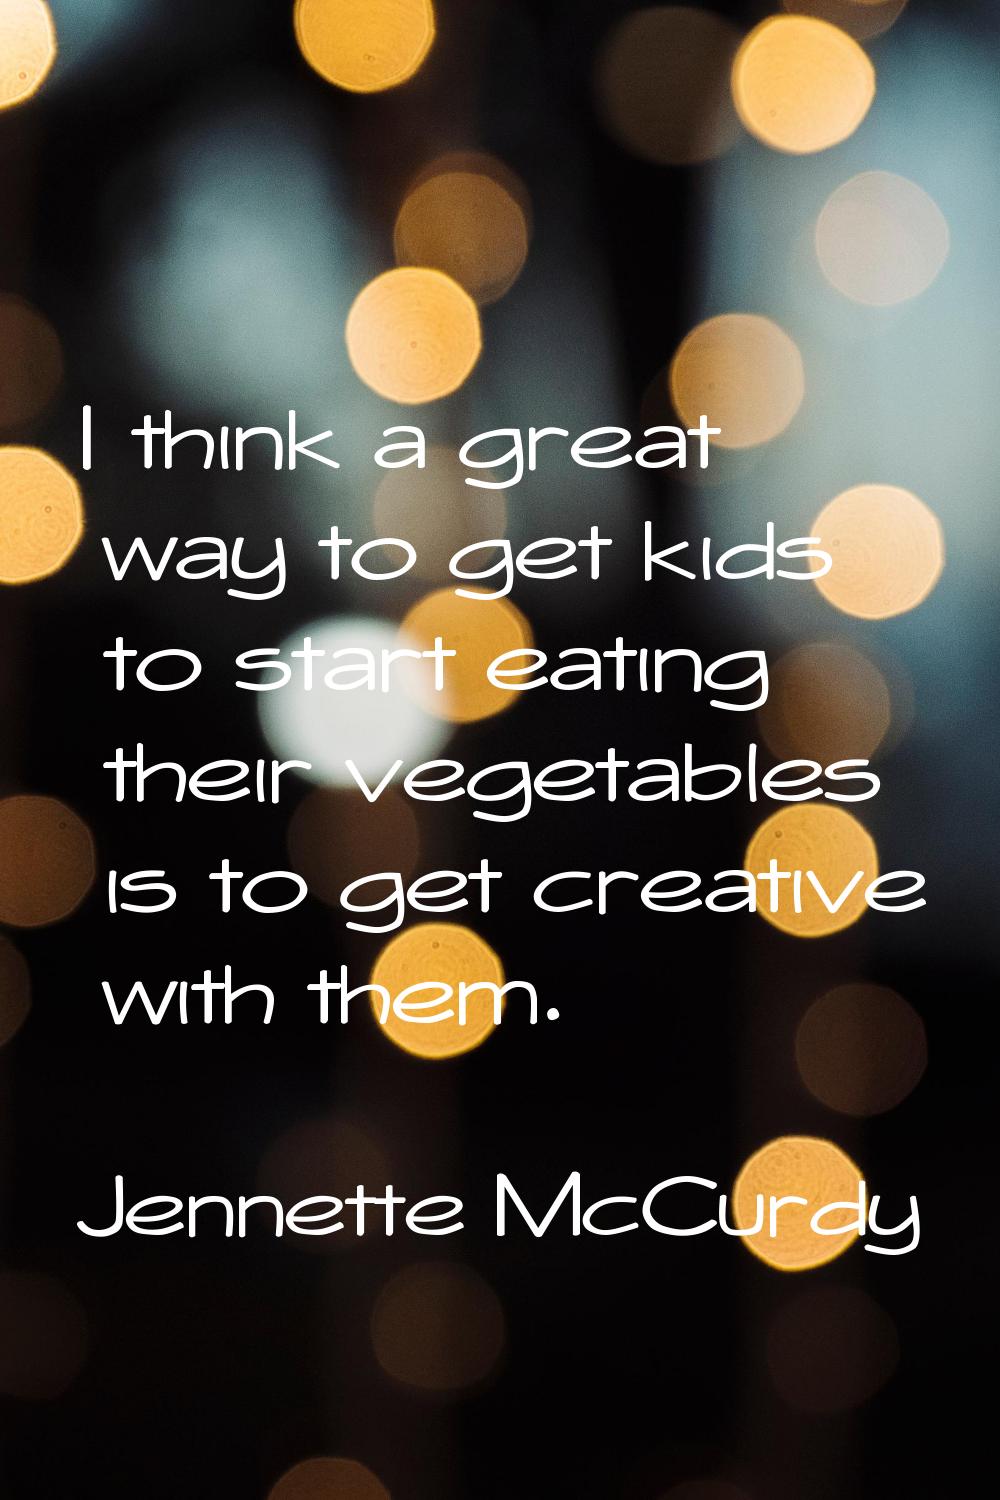 I think a great way to get kids to start eating their vegetables is to get creative with them.